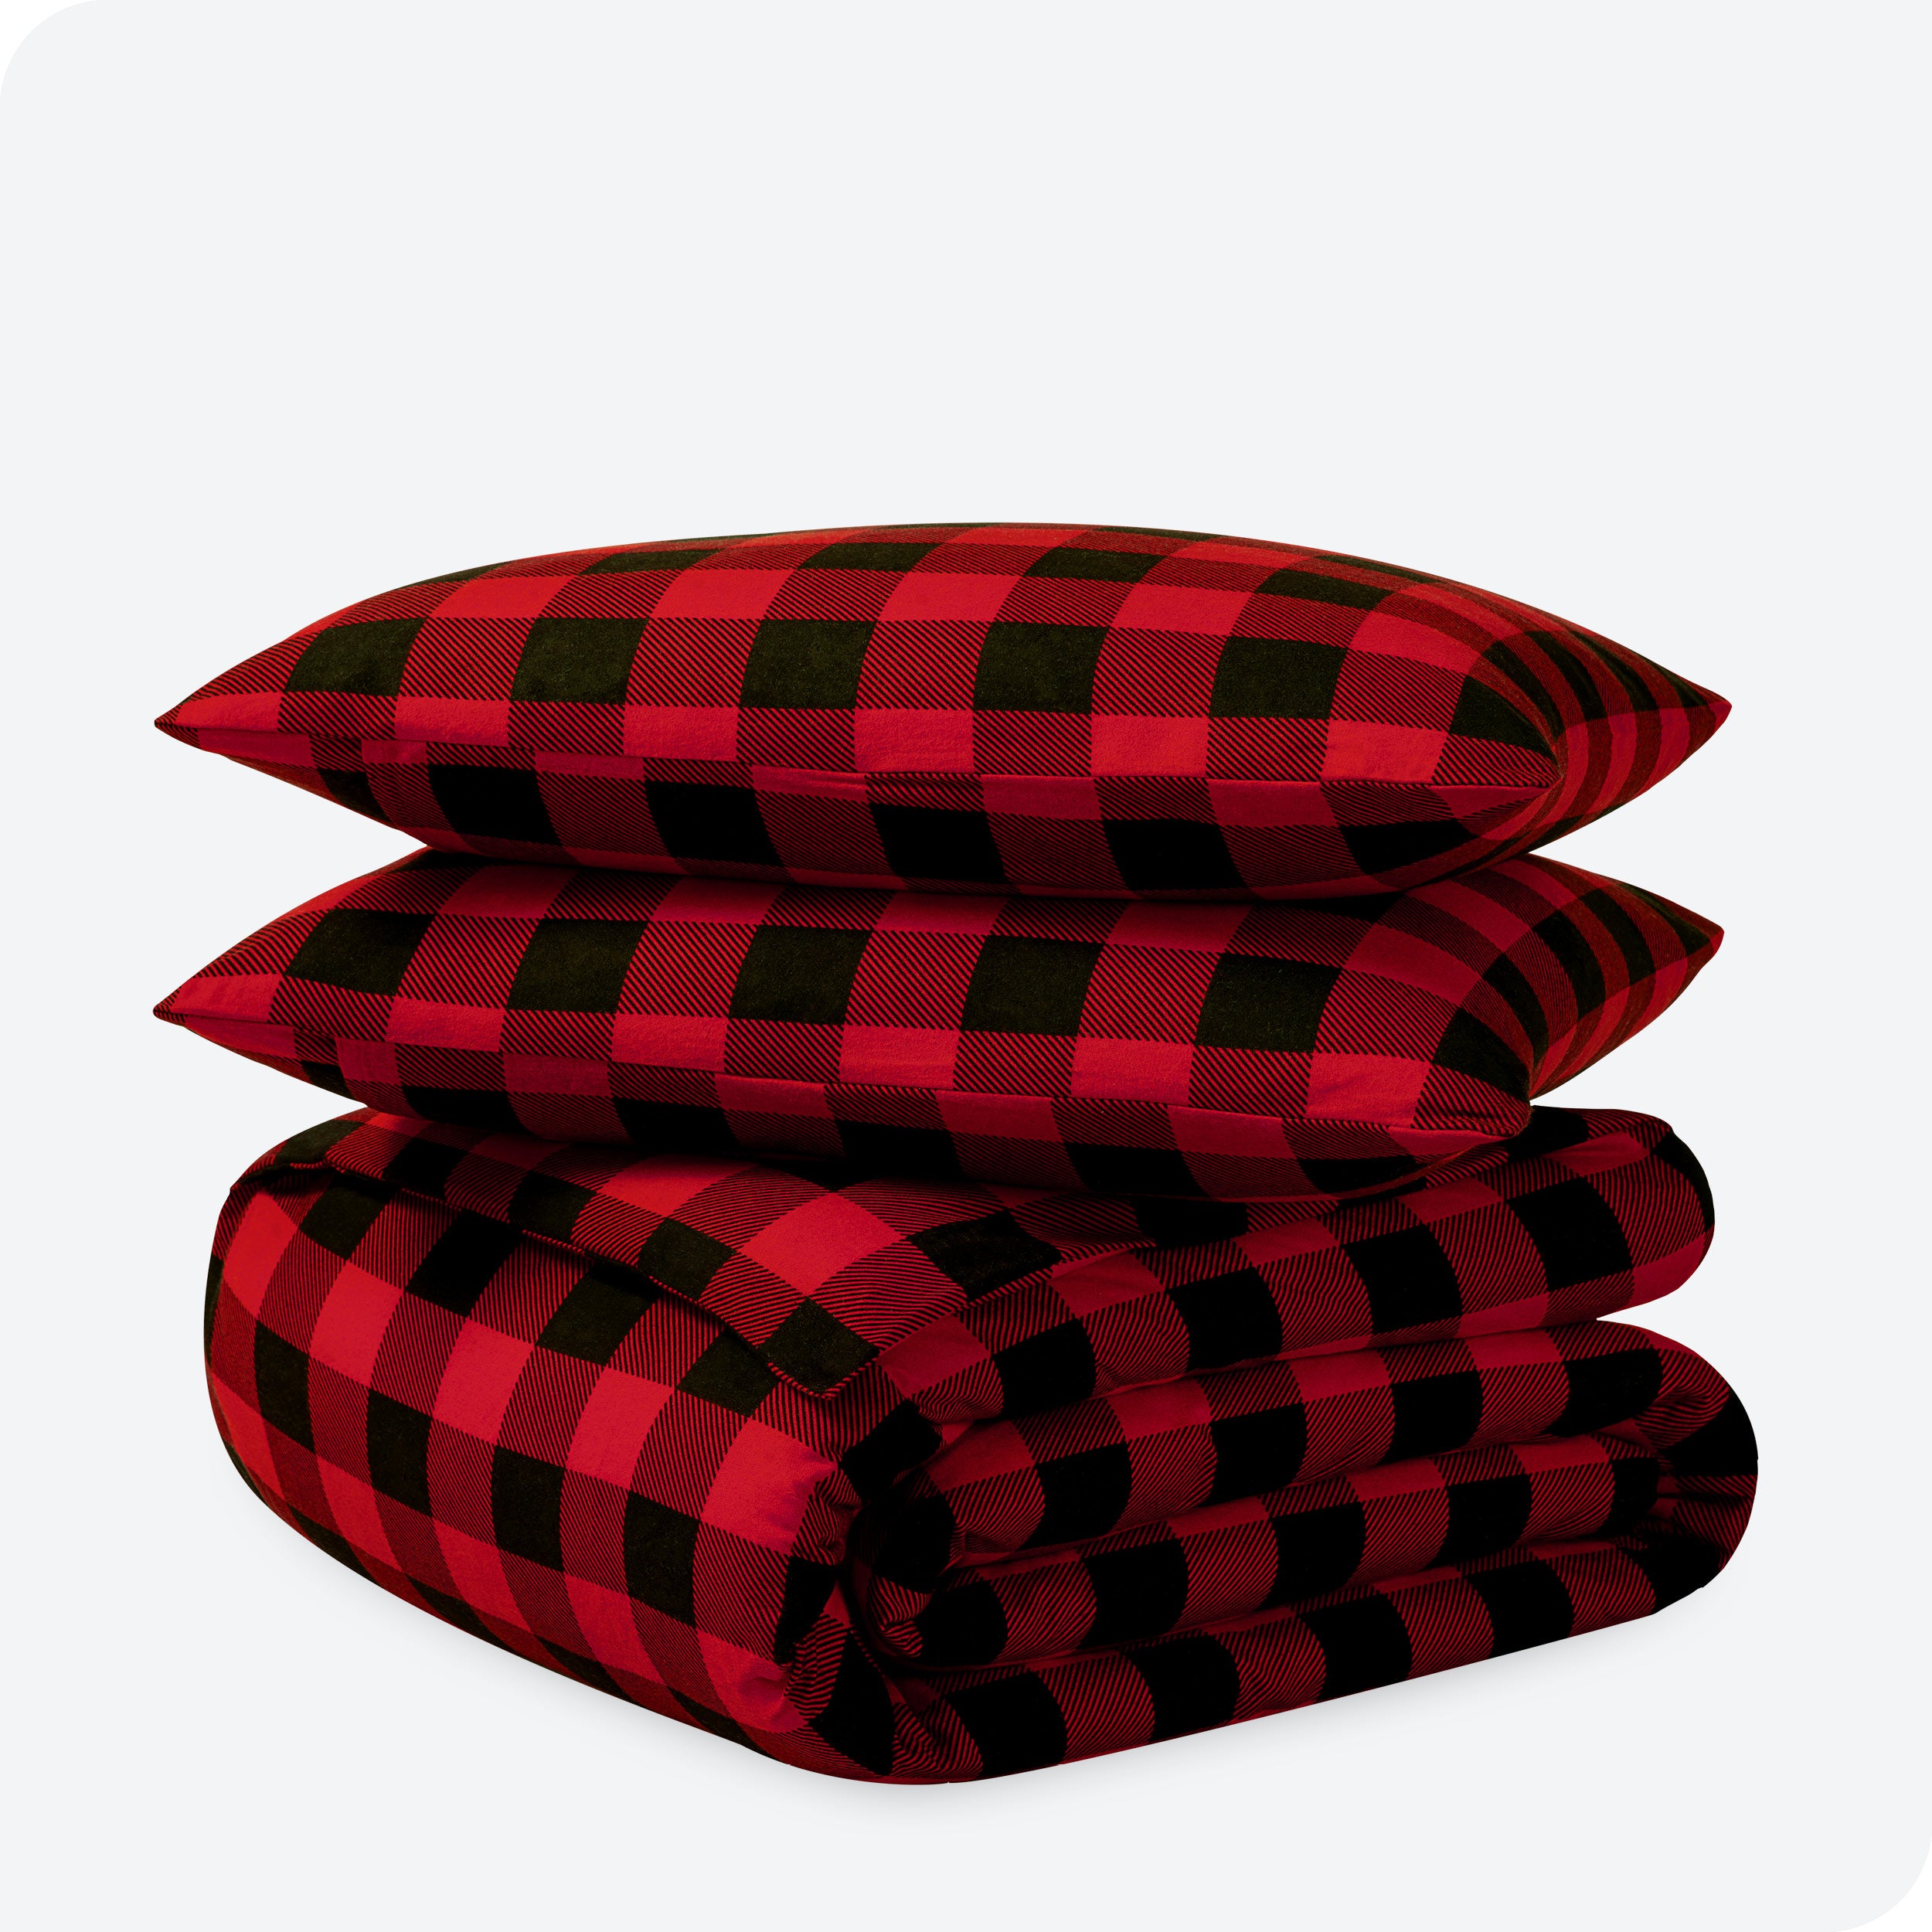 Buffalo plaid print duvet cover and sham set folded and stacked